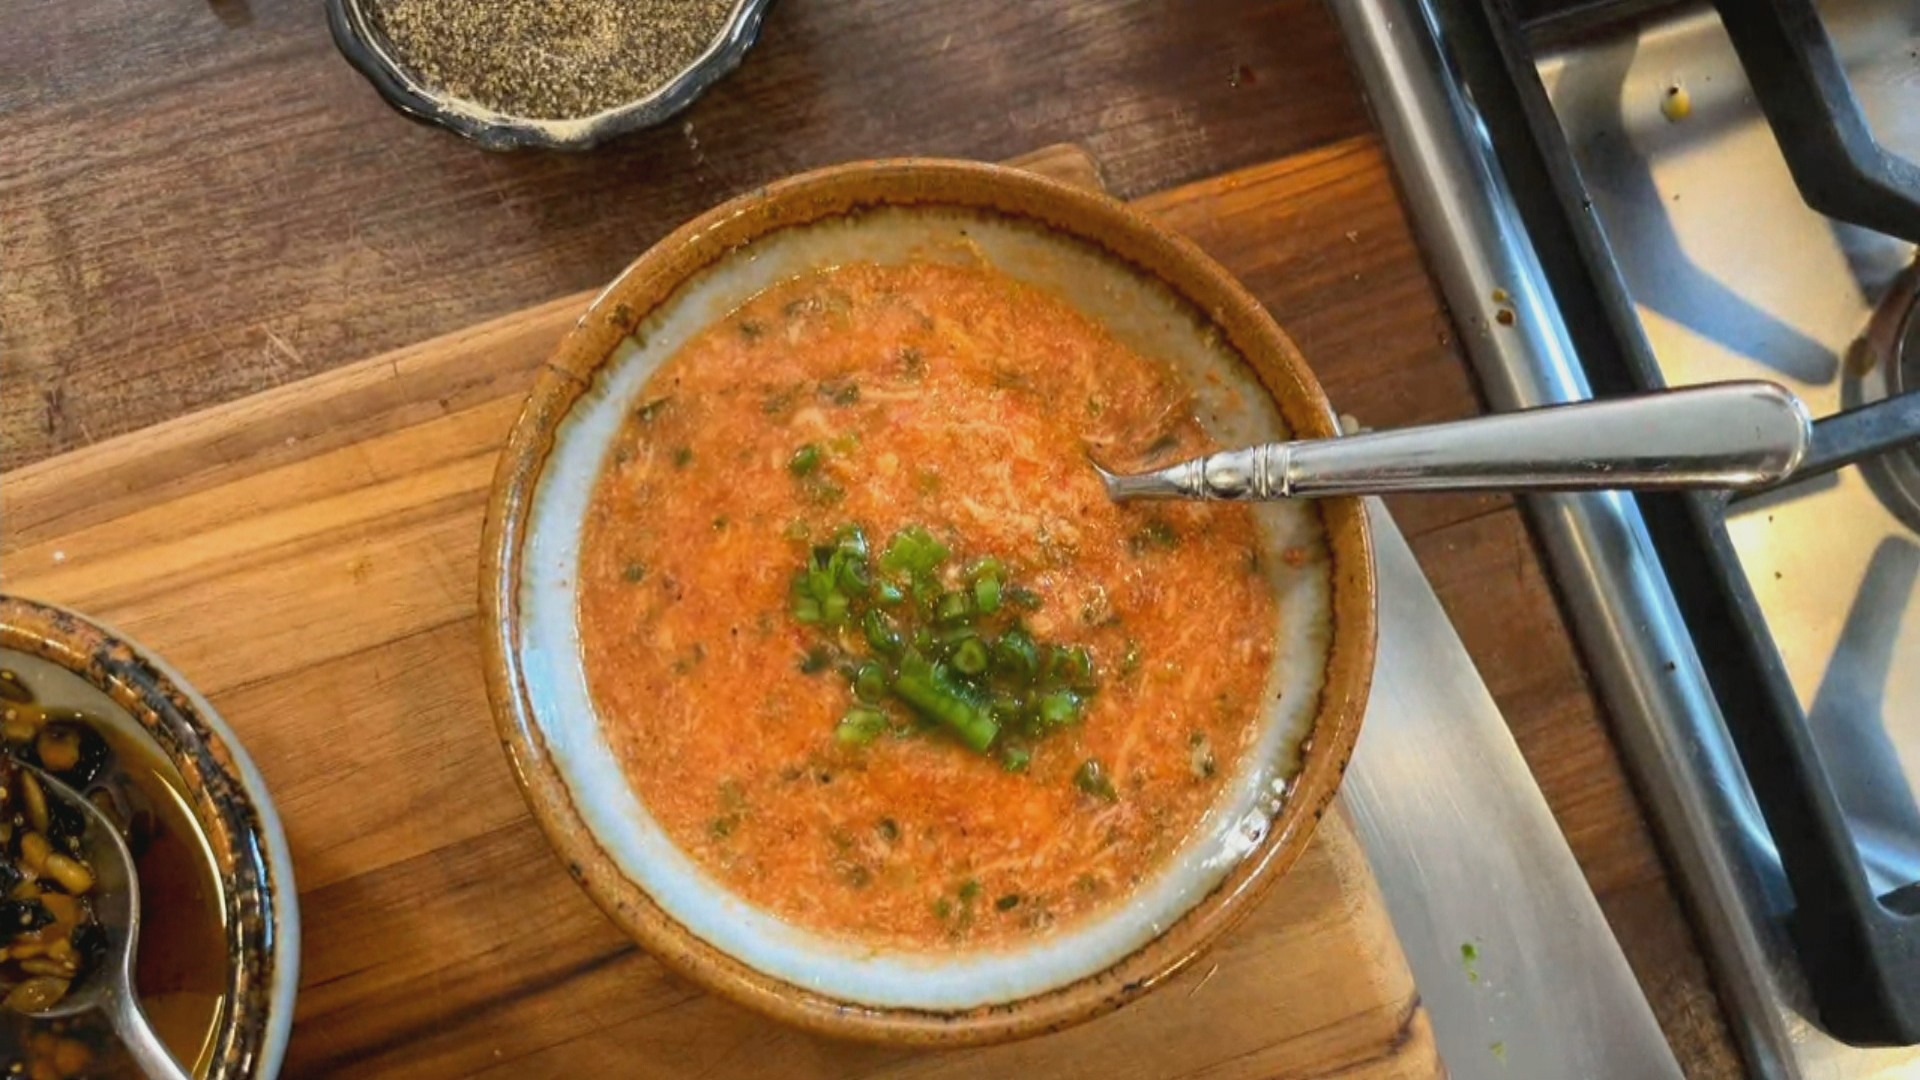 Spring onion and tomato soup with melty cheese